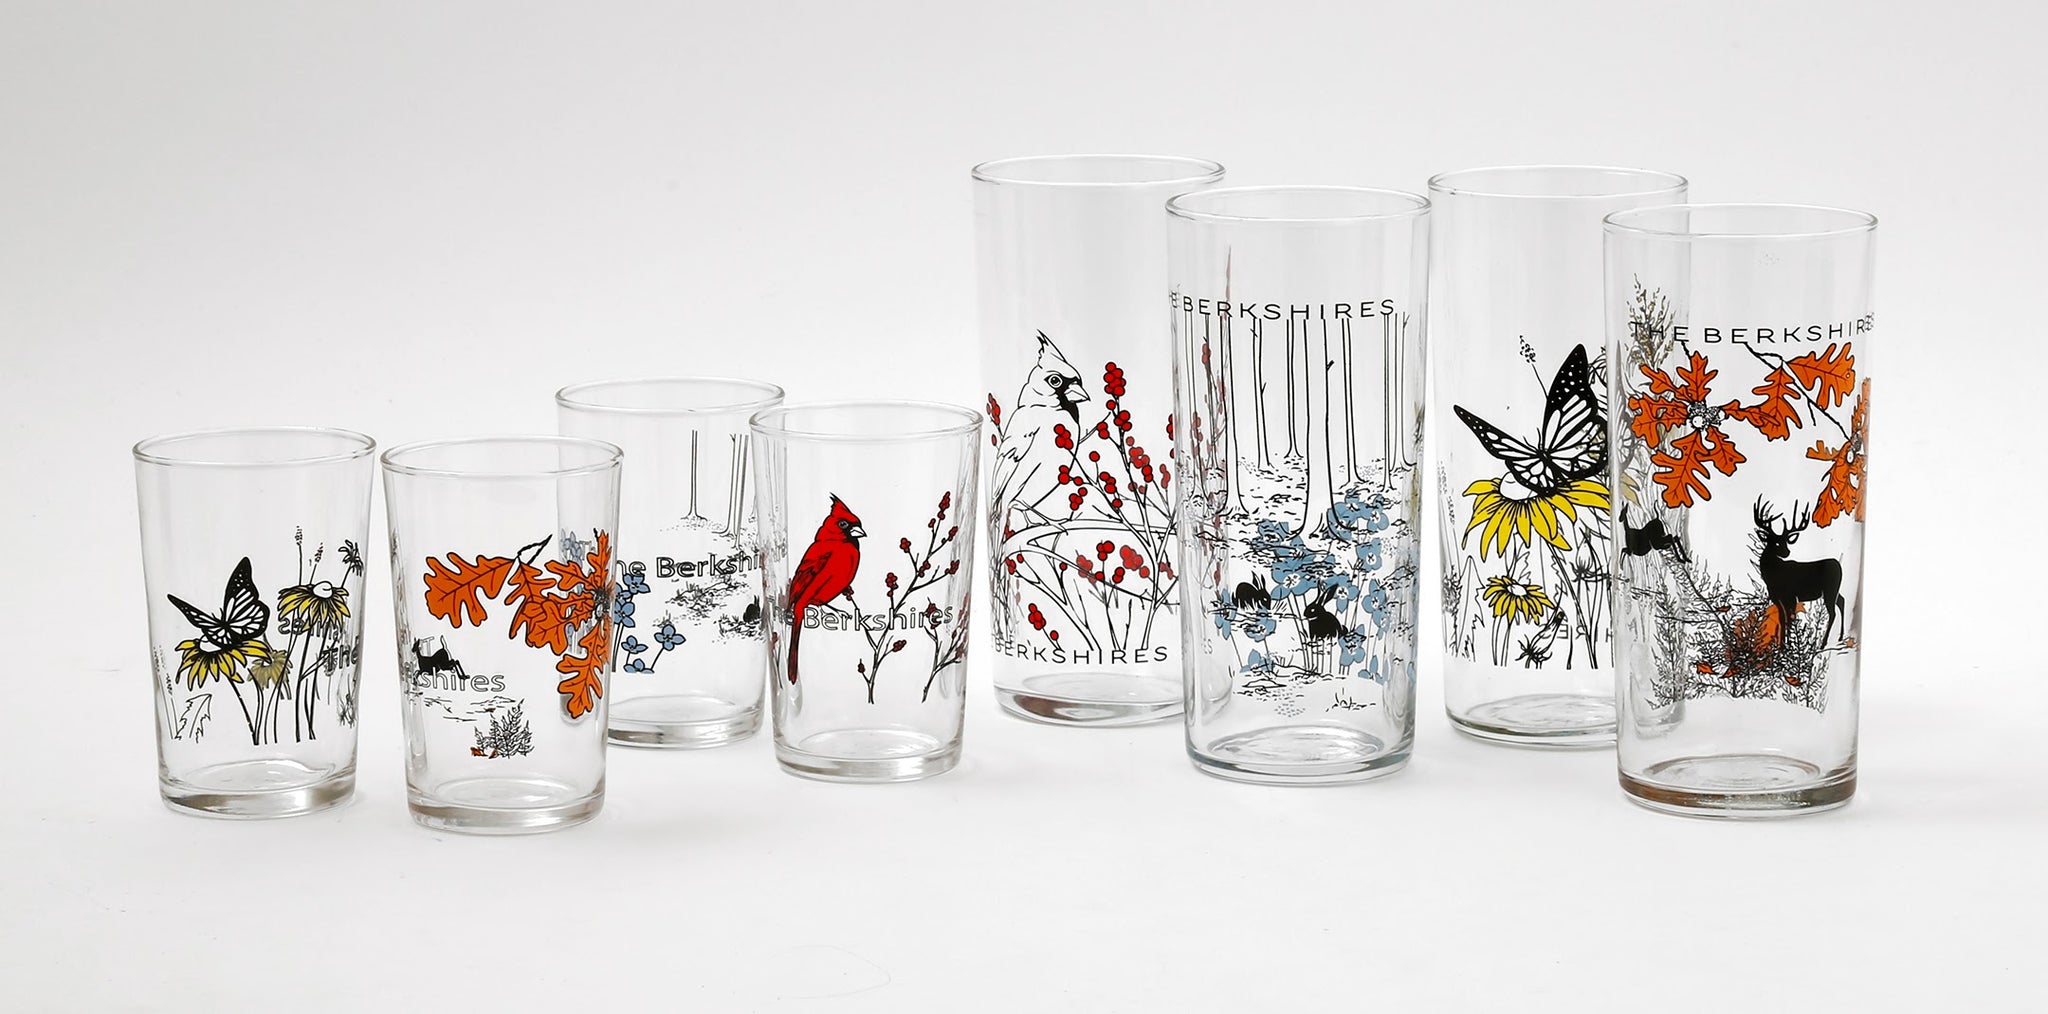 New size of your favorite Berkshire Glasses!